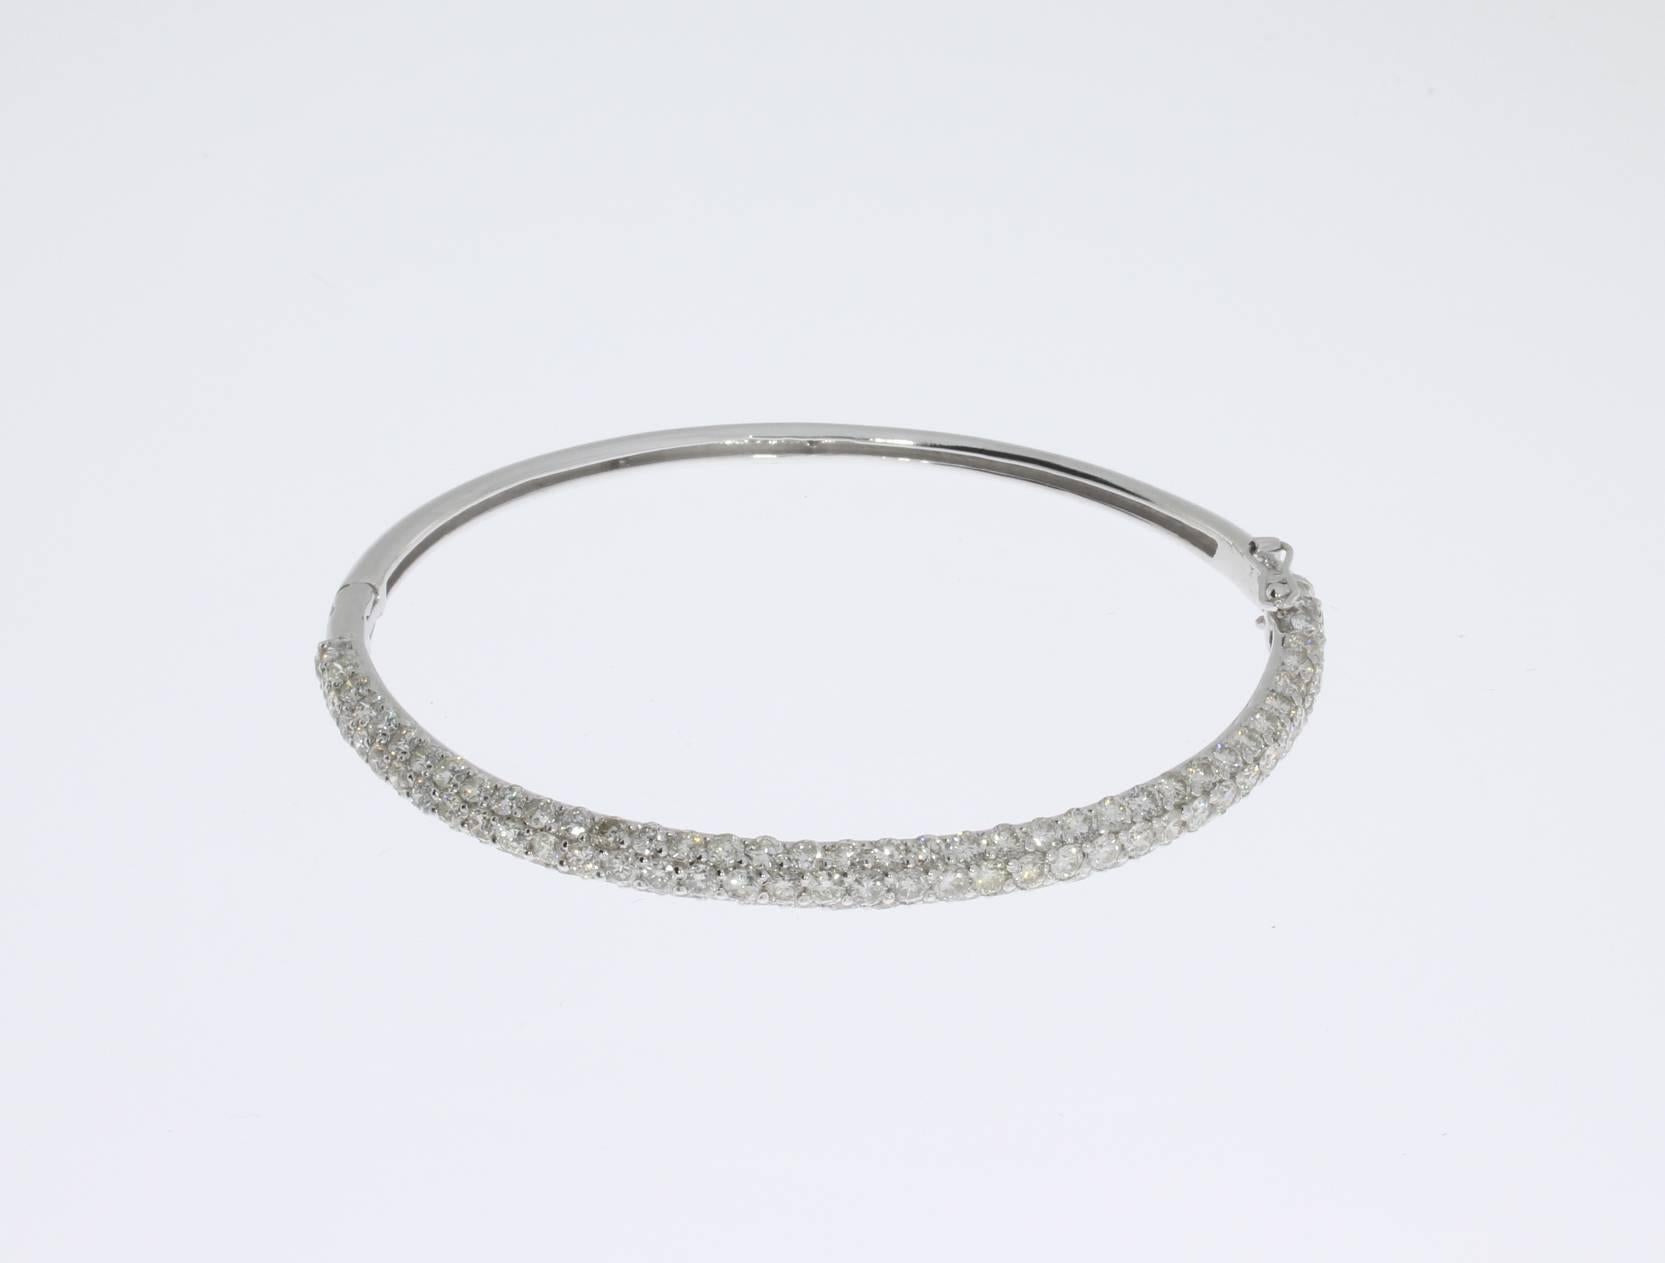 18 K white gold bangle bracelet with three rows of 115 brilliant-cut diamonds weighing 4,60 ct., color TW. Total weight: 10,99 g. New, unworn. Dimensions: 2.2 x 2.44 in ( 5,6 x 6,2 cm )